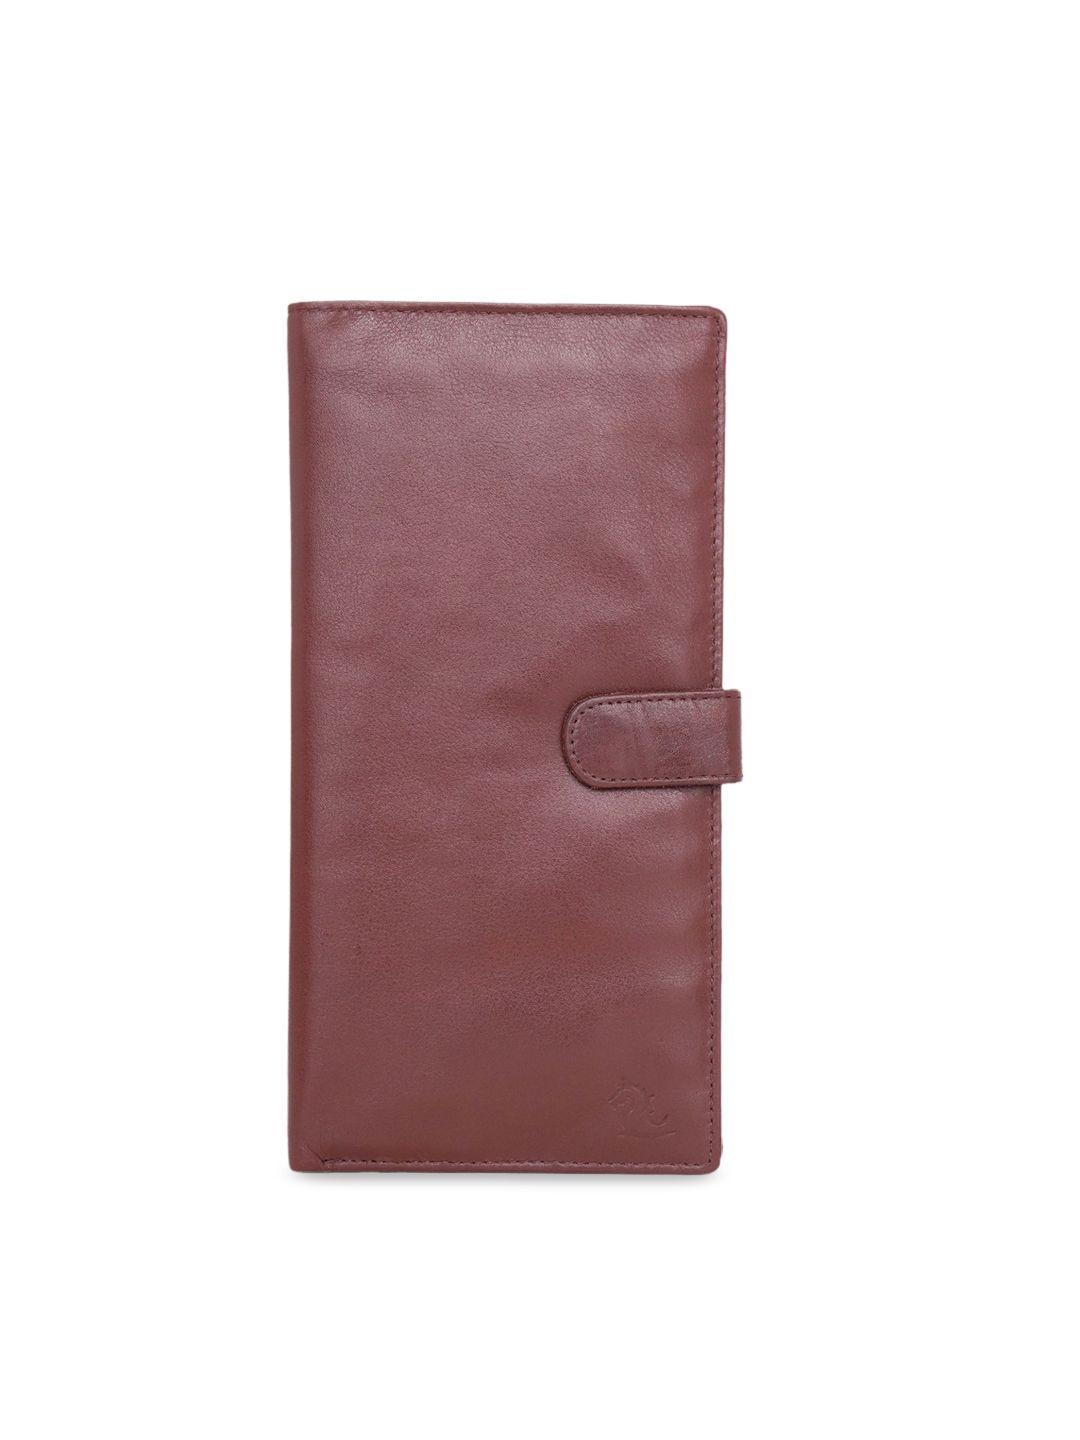 kara unisex tan solid two fold leather wallet